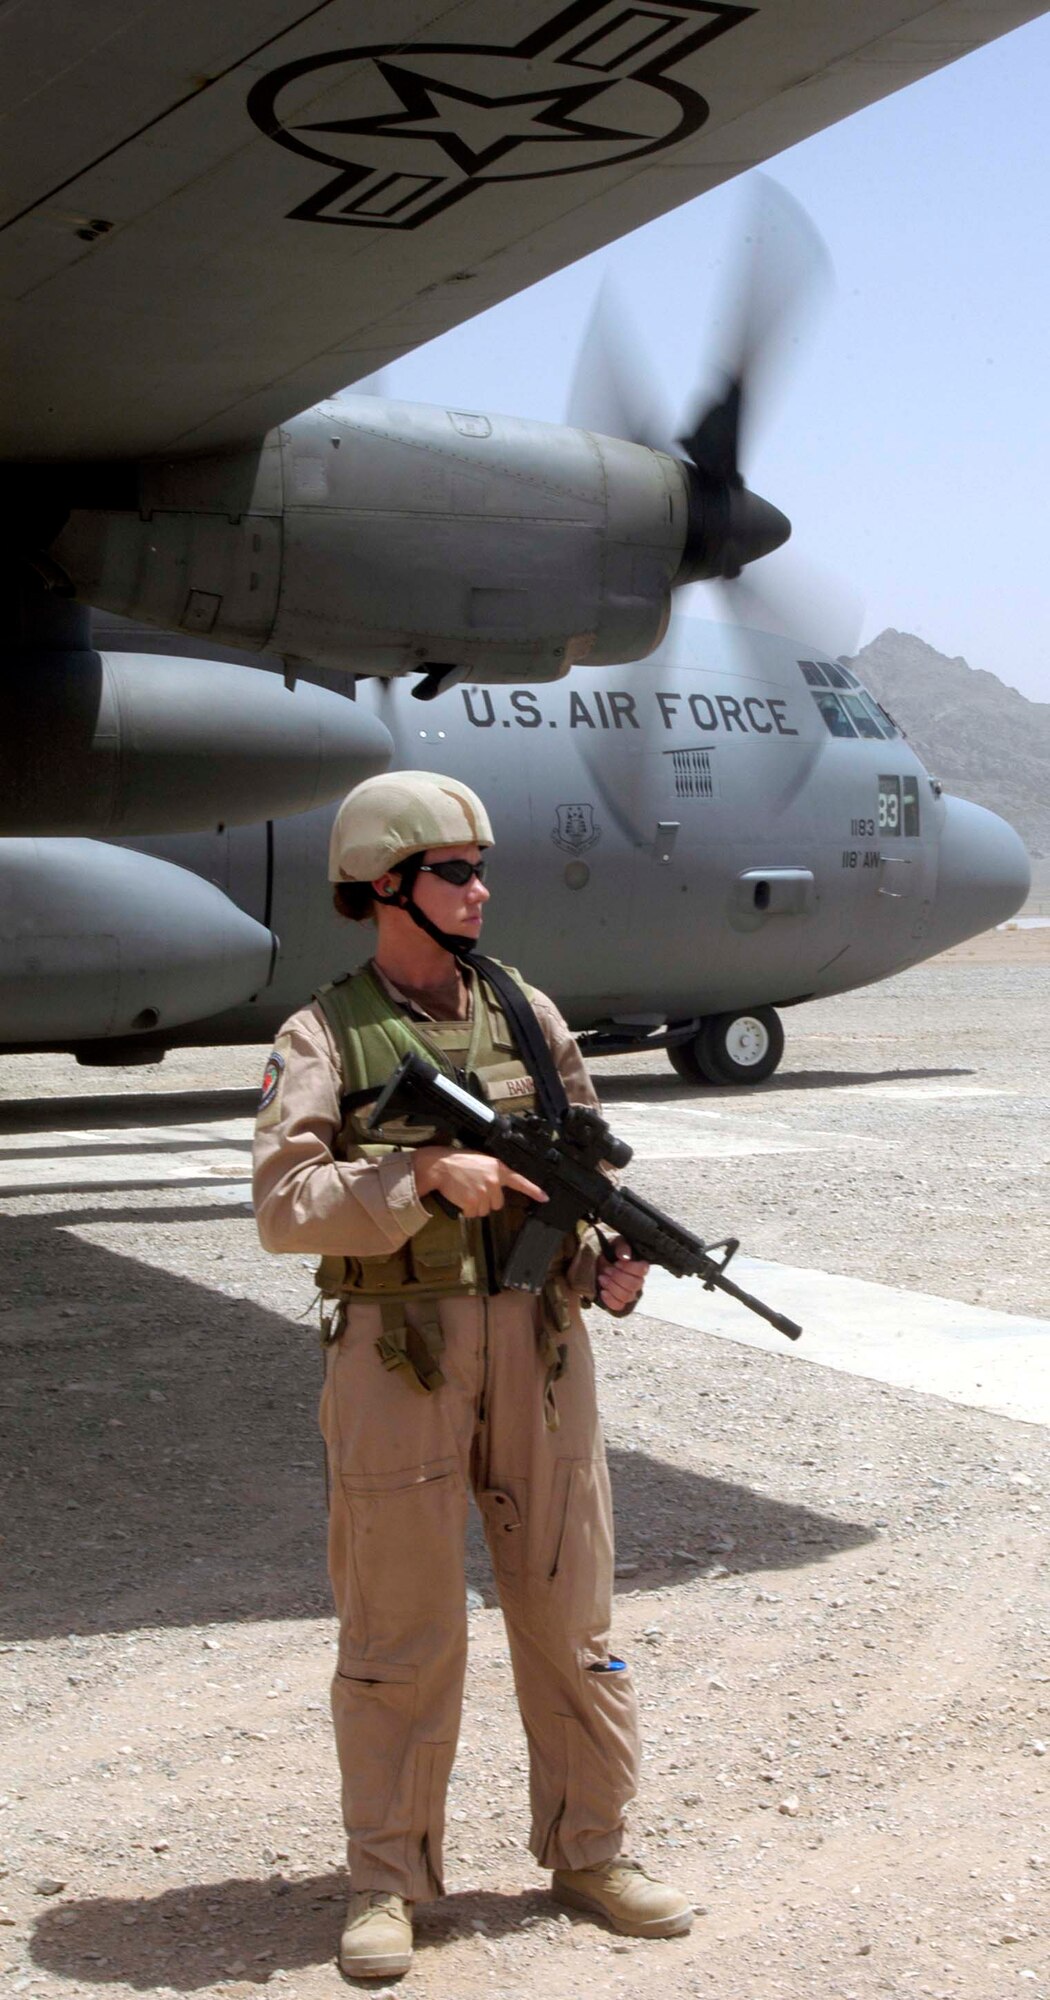 Staff Sgt. Gloria Banks watches for suspicious activity while guarding a C-130 Hercules at an airstrip near Farah Afghanistan, Aug. 10. She is part of the 455th Expeditionary Security Forces fly-away security team, which provides force protection for aircraft and crews throughout Afghanistan.  (US Air Force photo/Maj. David Kurle)